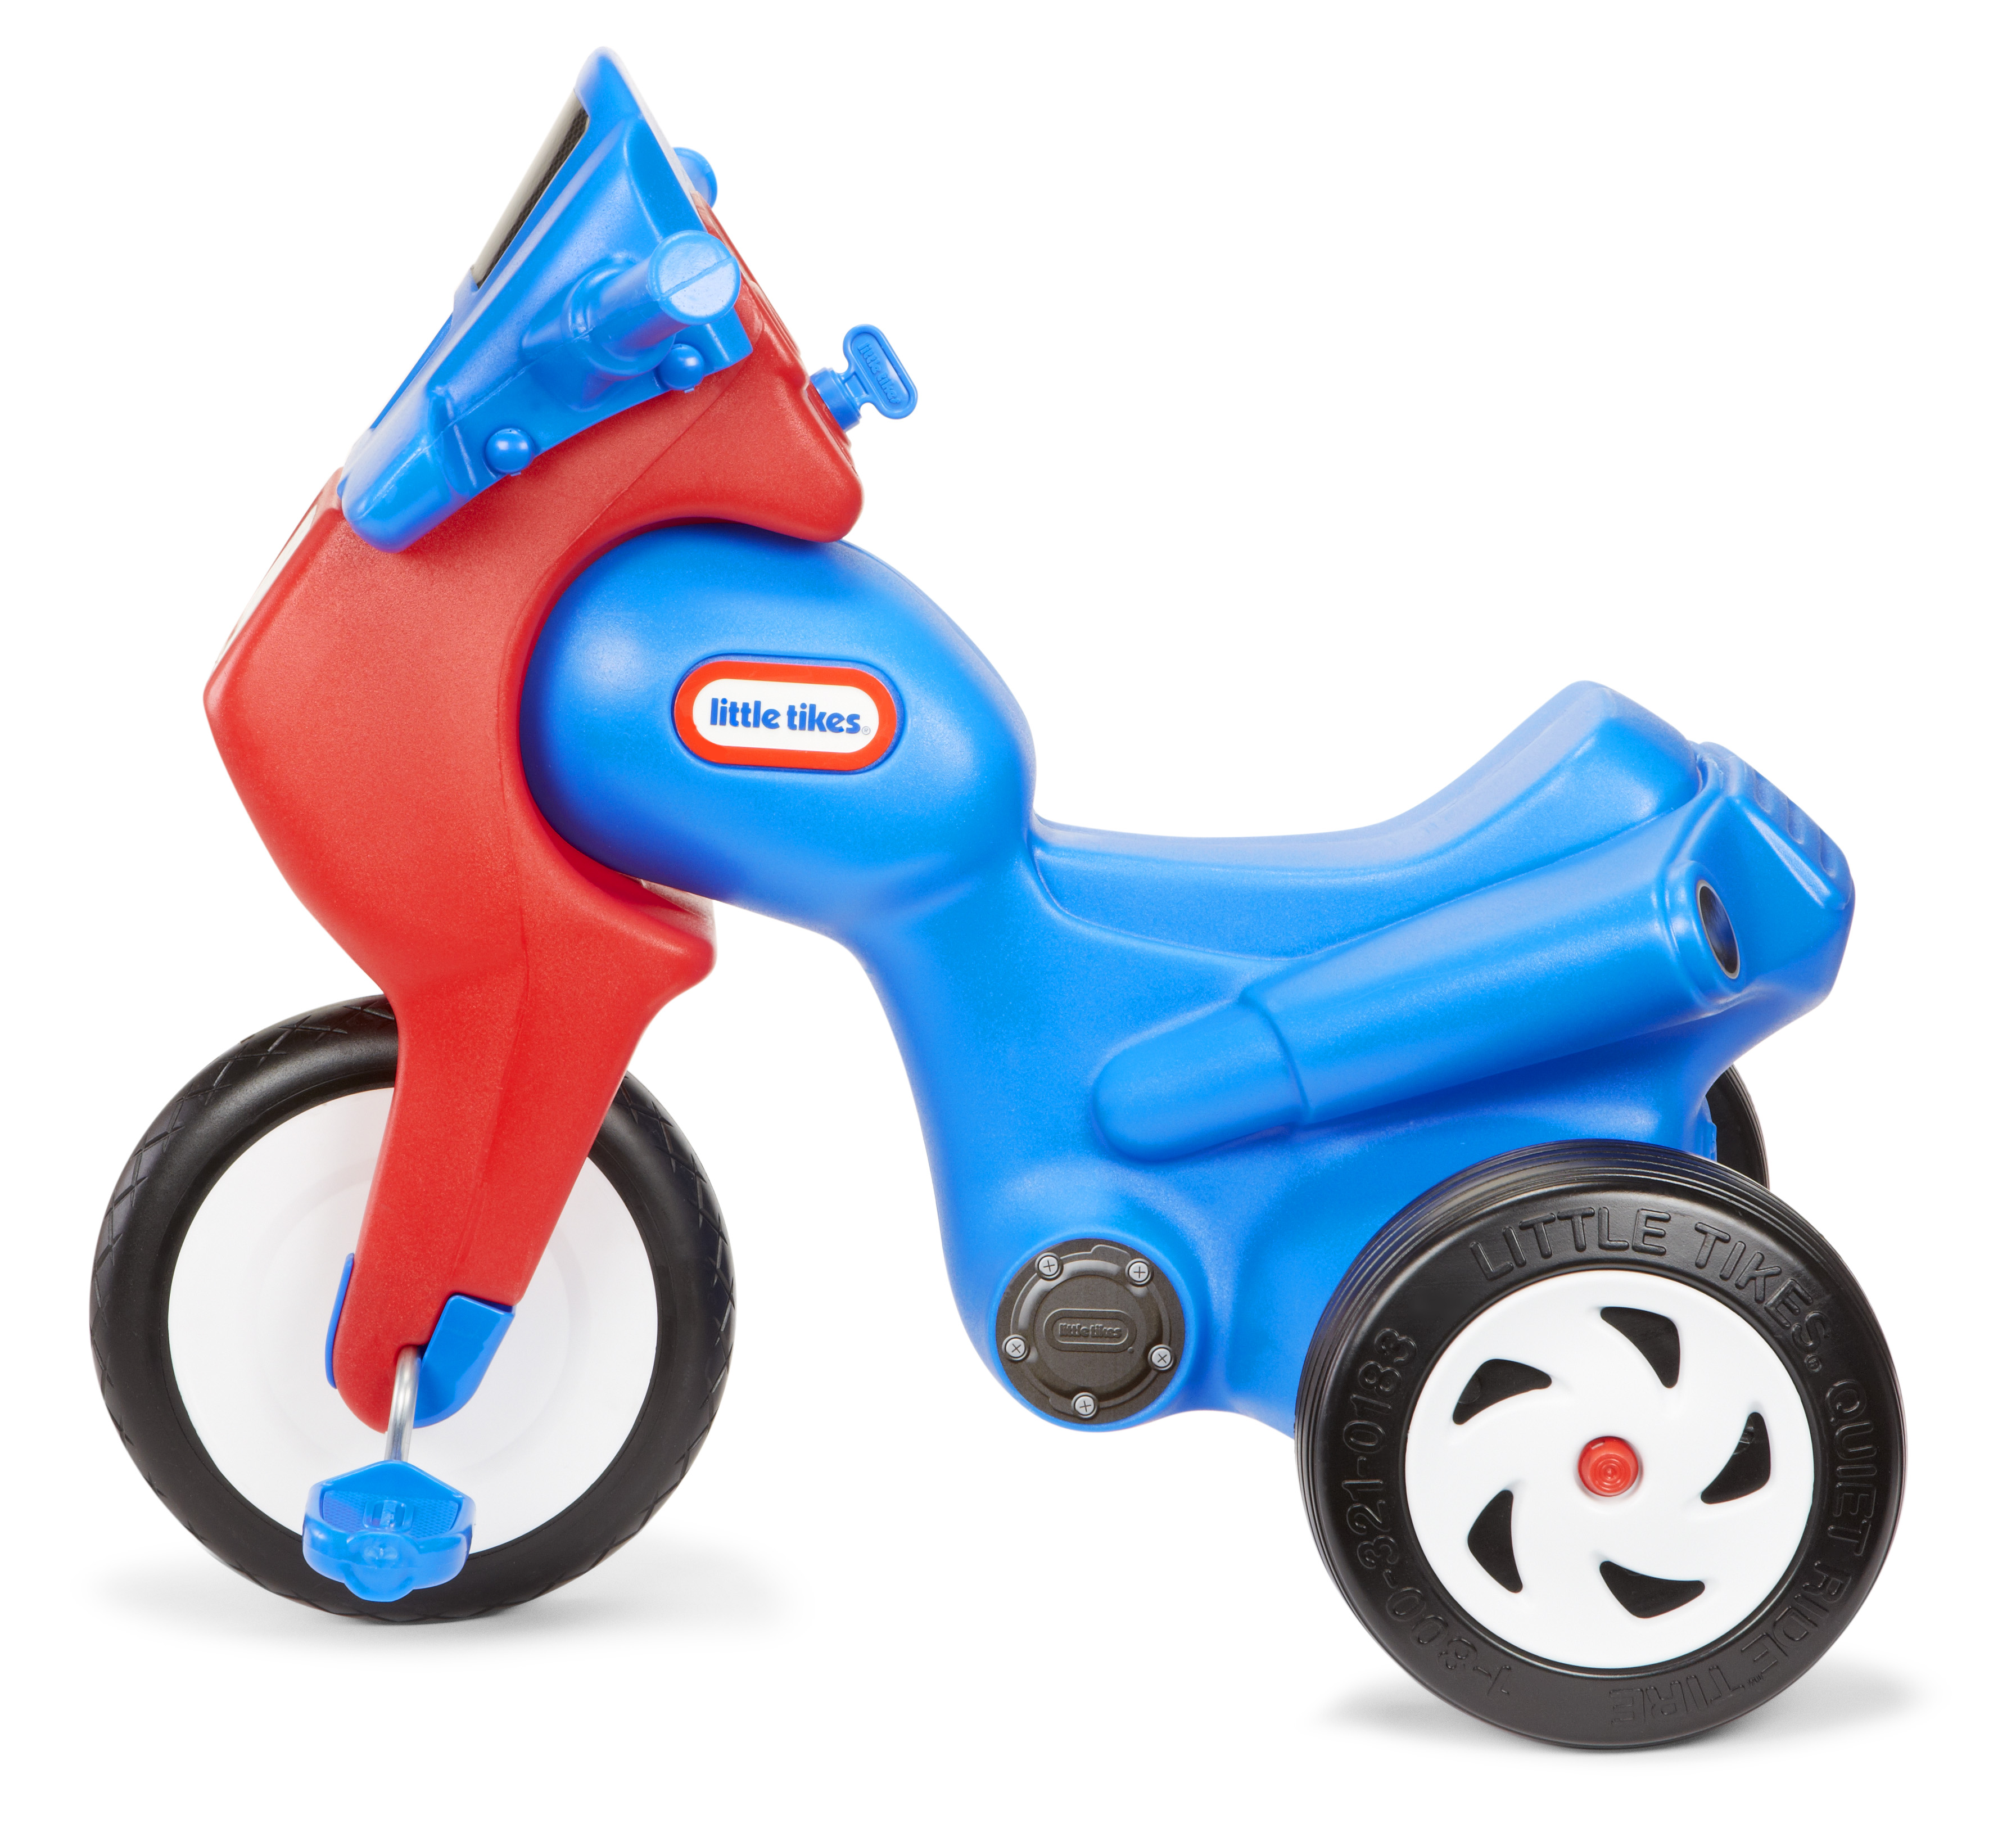 Little Tikes Classic Sport Cycle Pedal Ride On Trike - image 1 of 7